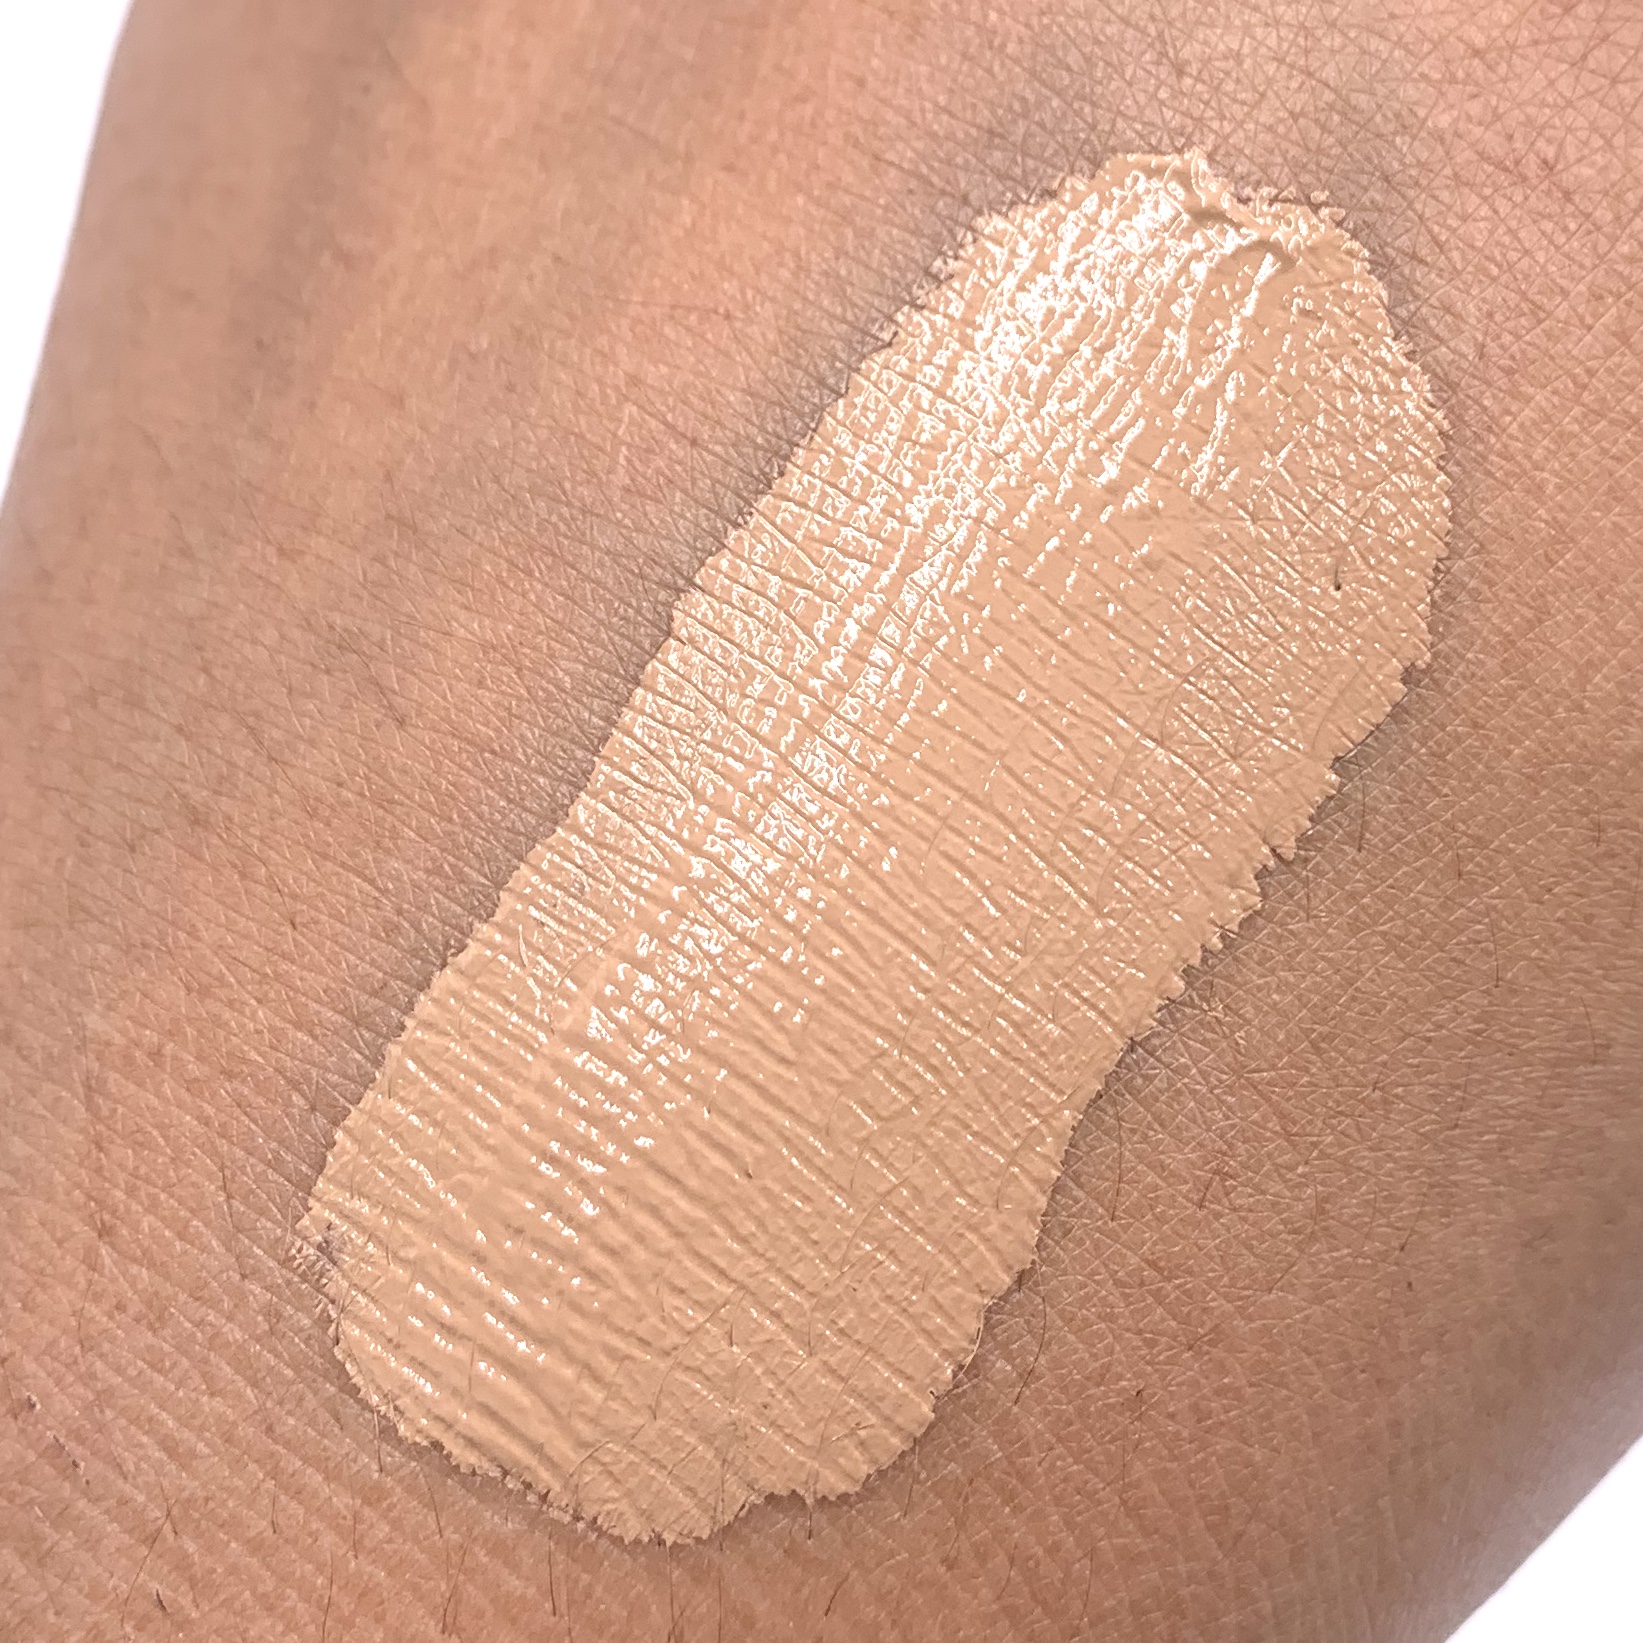 IT Cosmetics CC+ Cream with SPF 50+ in Tan Swatch for Ipsy Glam Bag September 2020